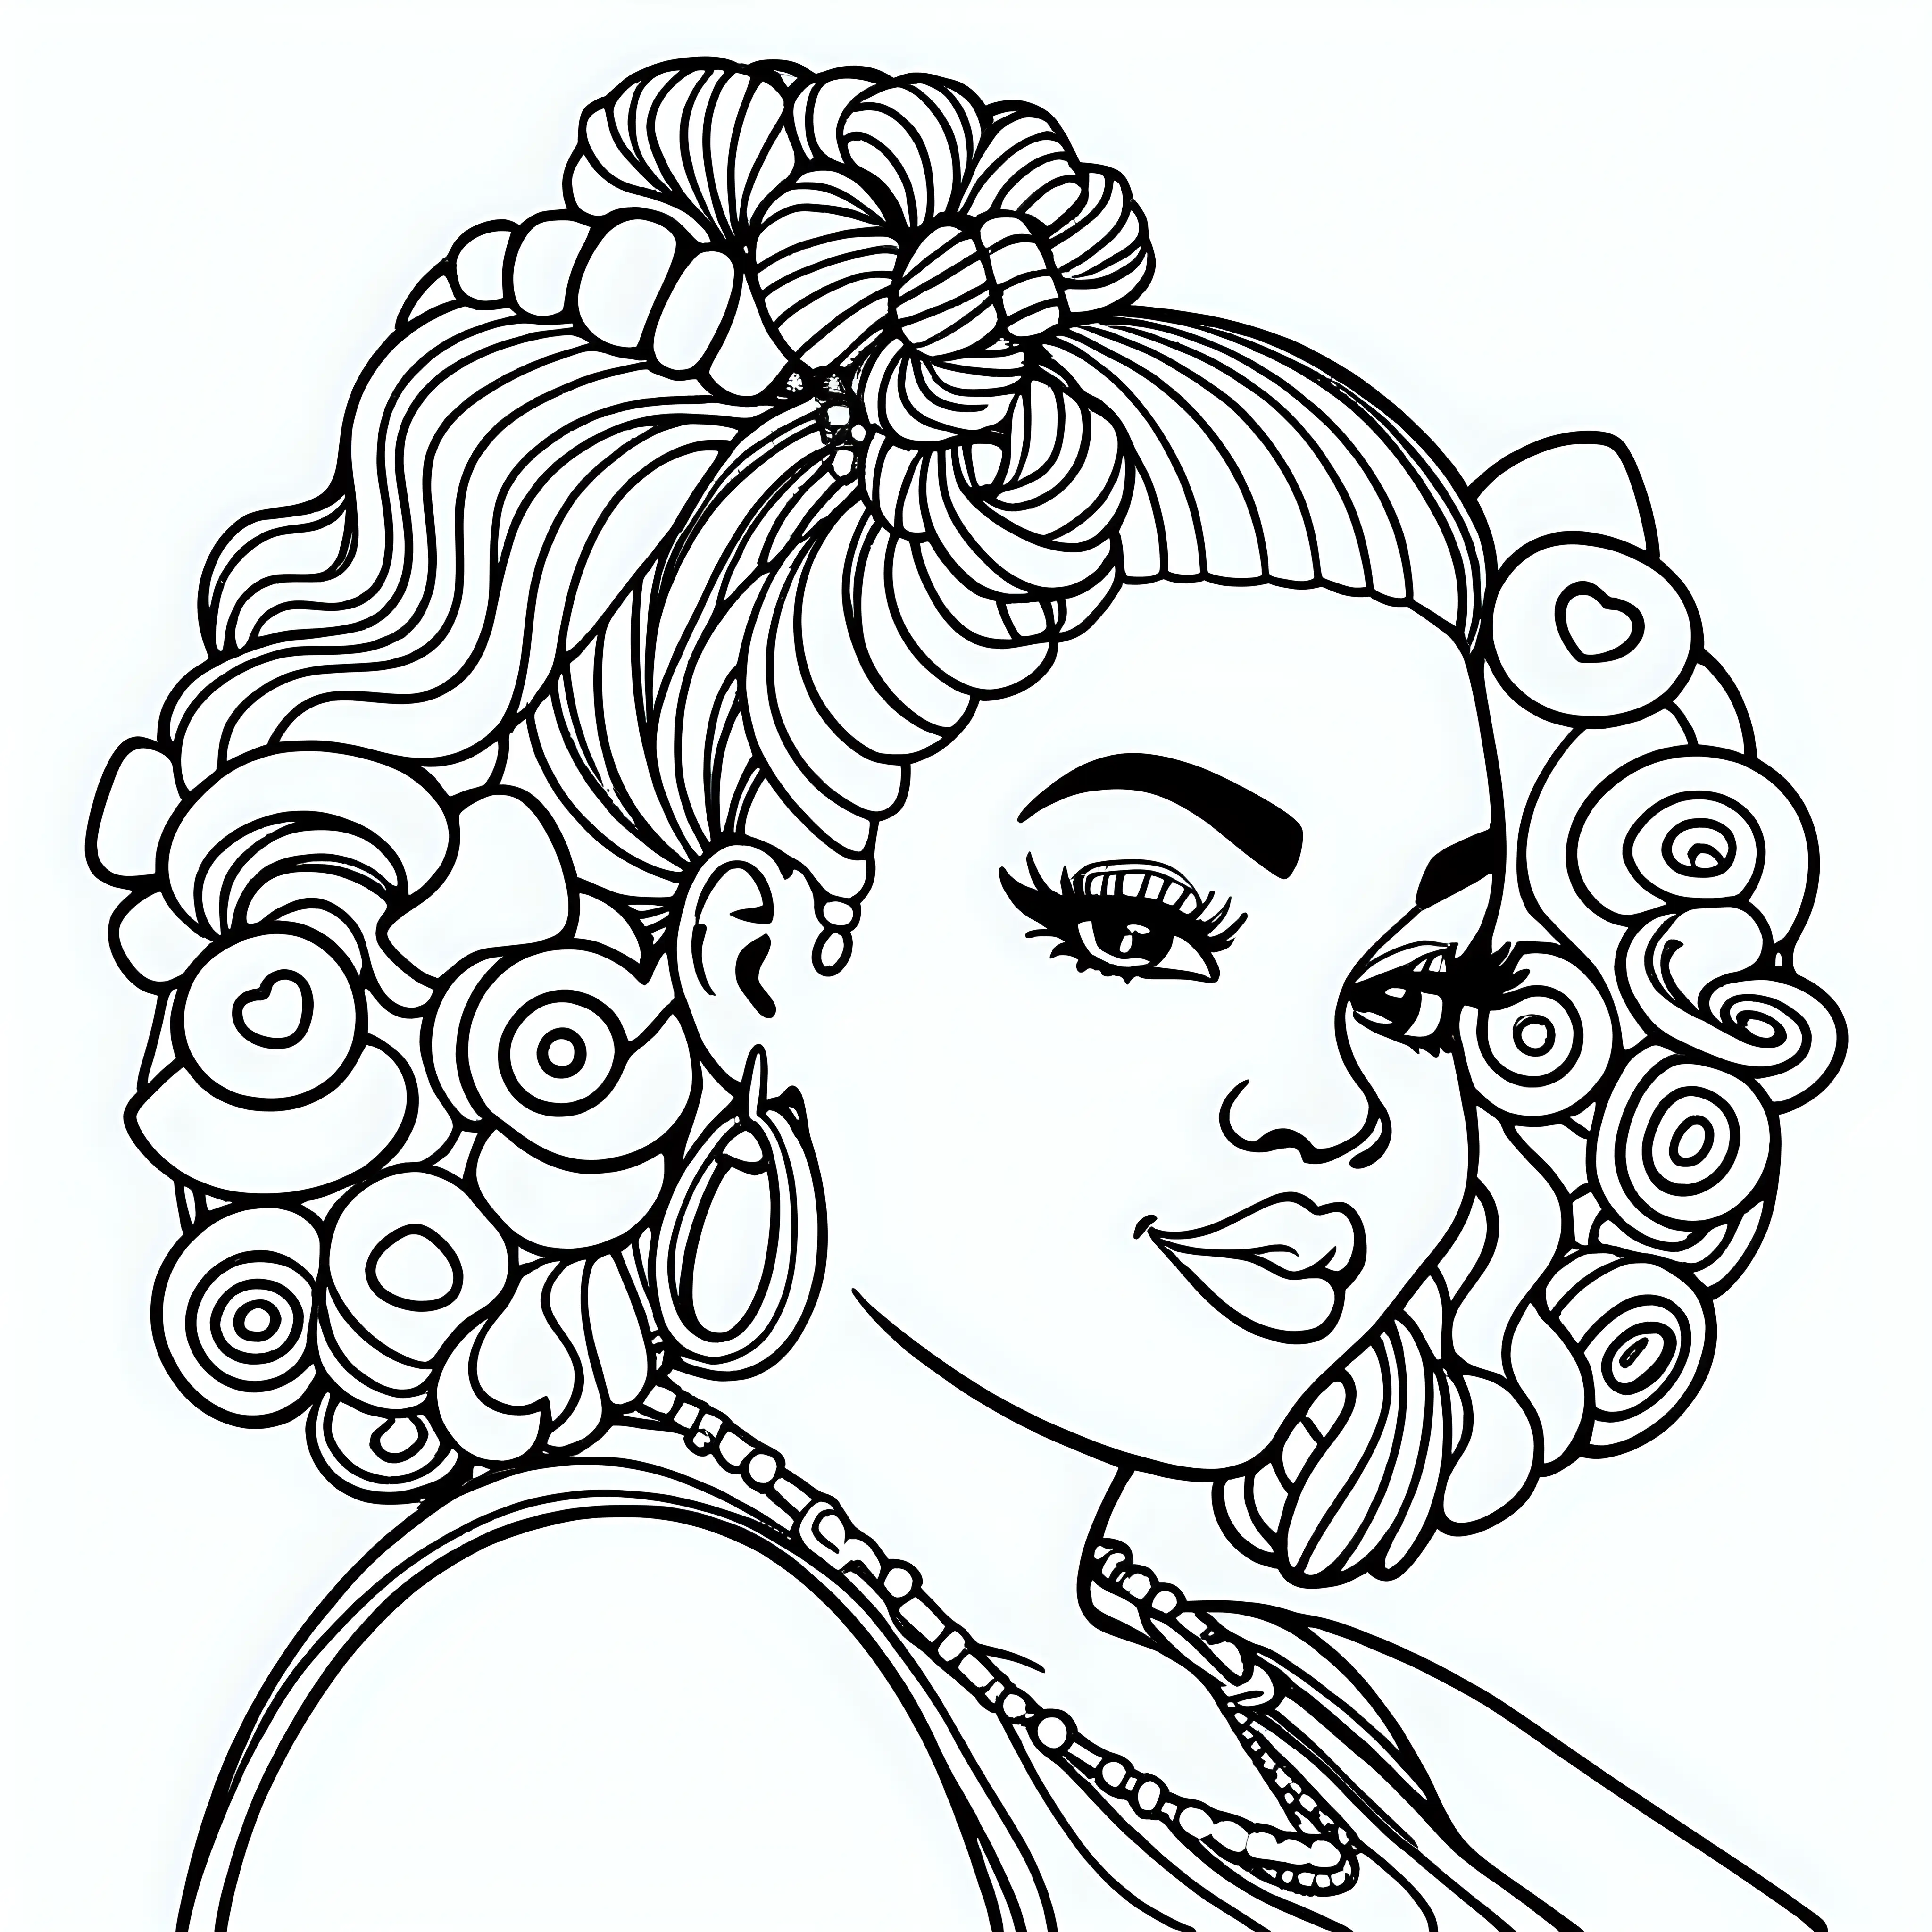 Curvy Plus Size Black Woman with Candy Hair Accessories in Lisa Frank Style